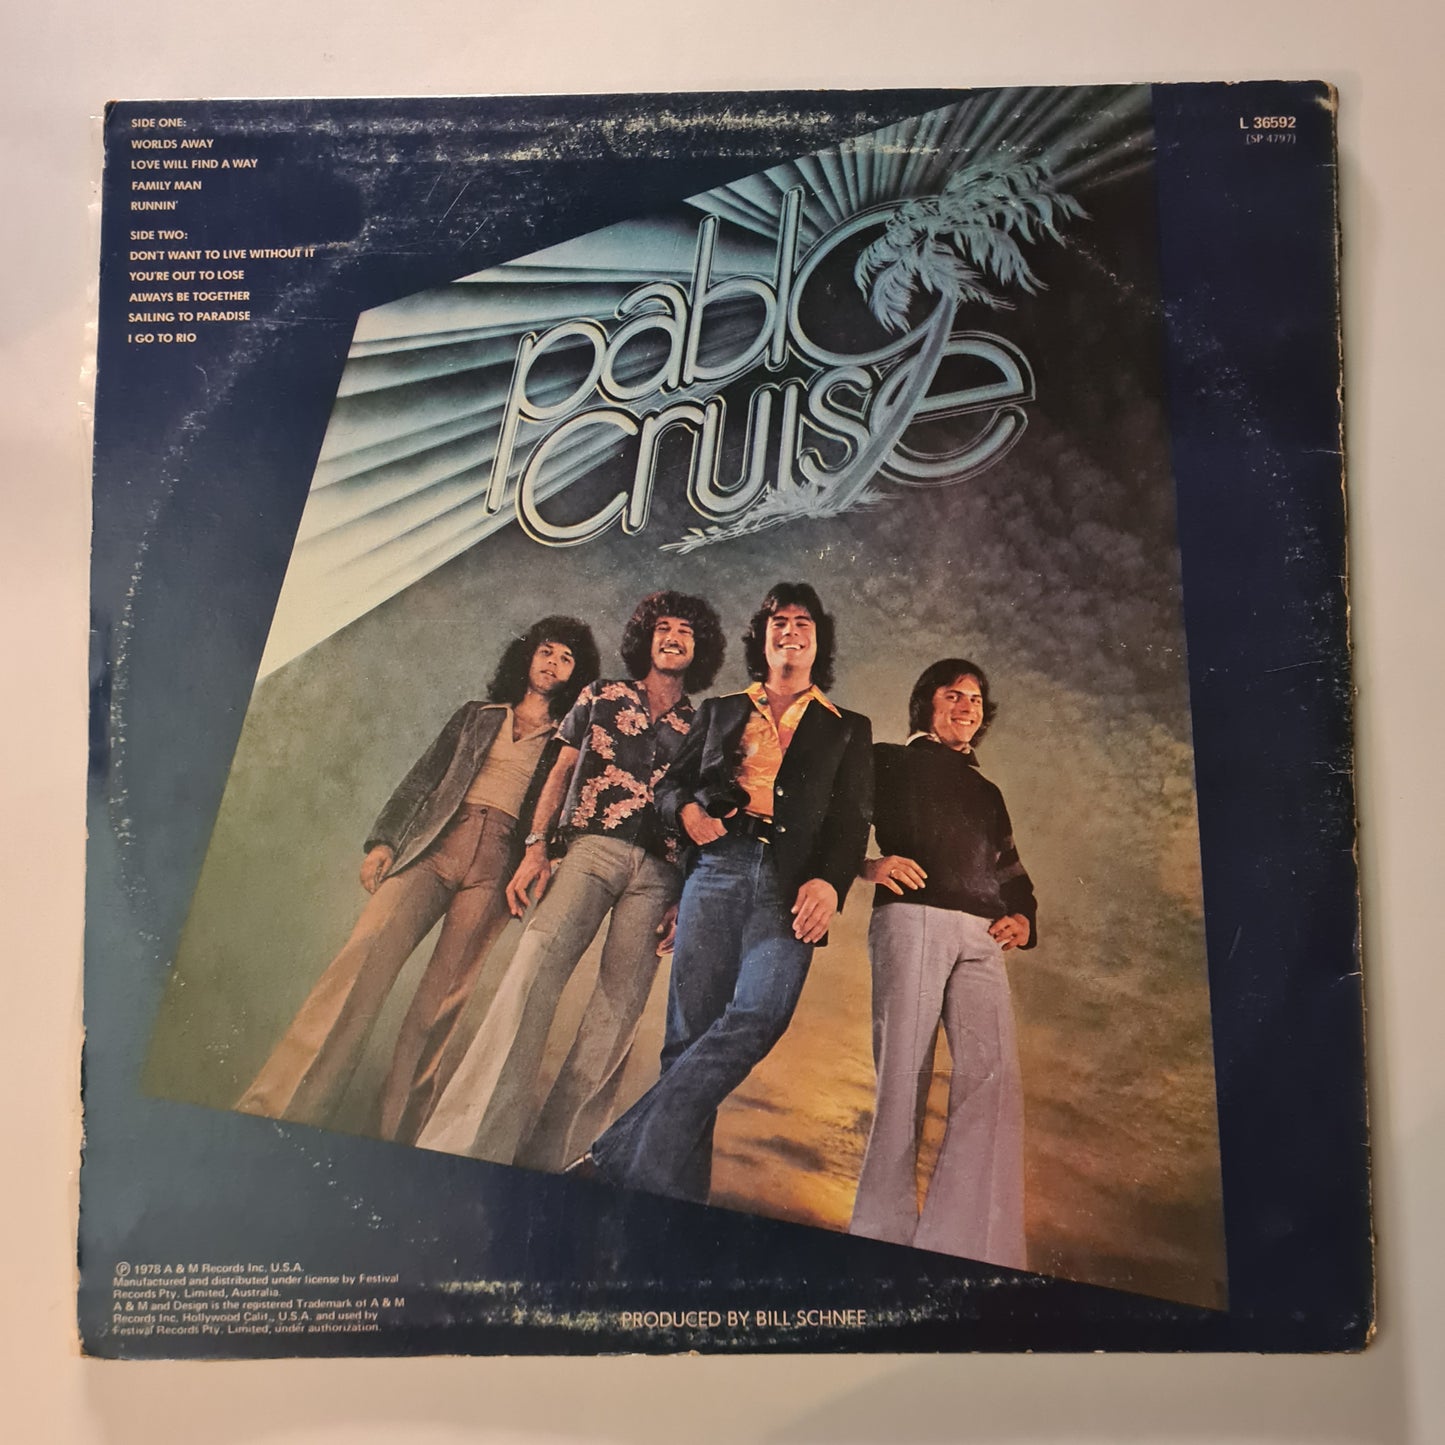 CLEARANCE STOCK! - PABLO CRUISE - VINYL RECORD